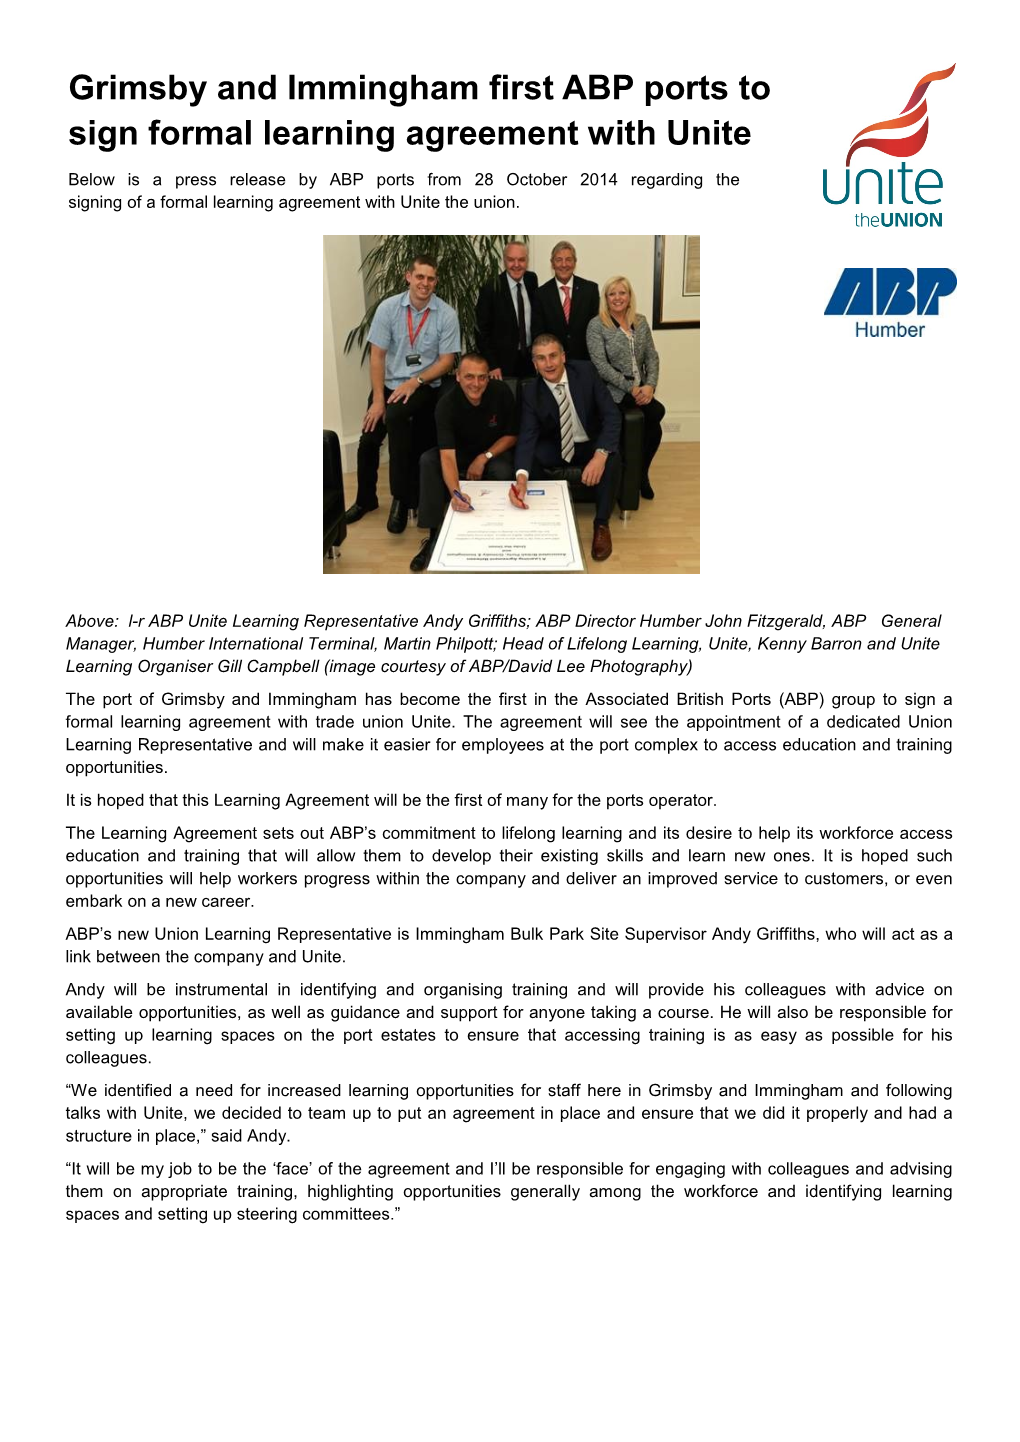 Grimsby and Immingham First ABP Ports to Sign Formal Learning